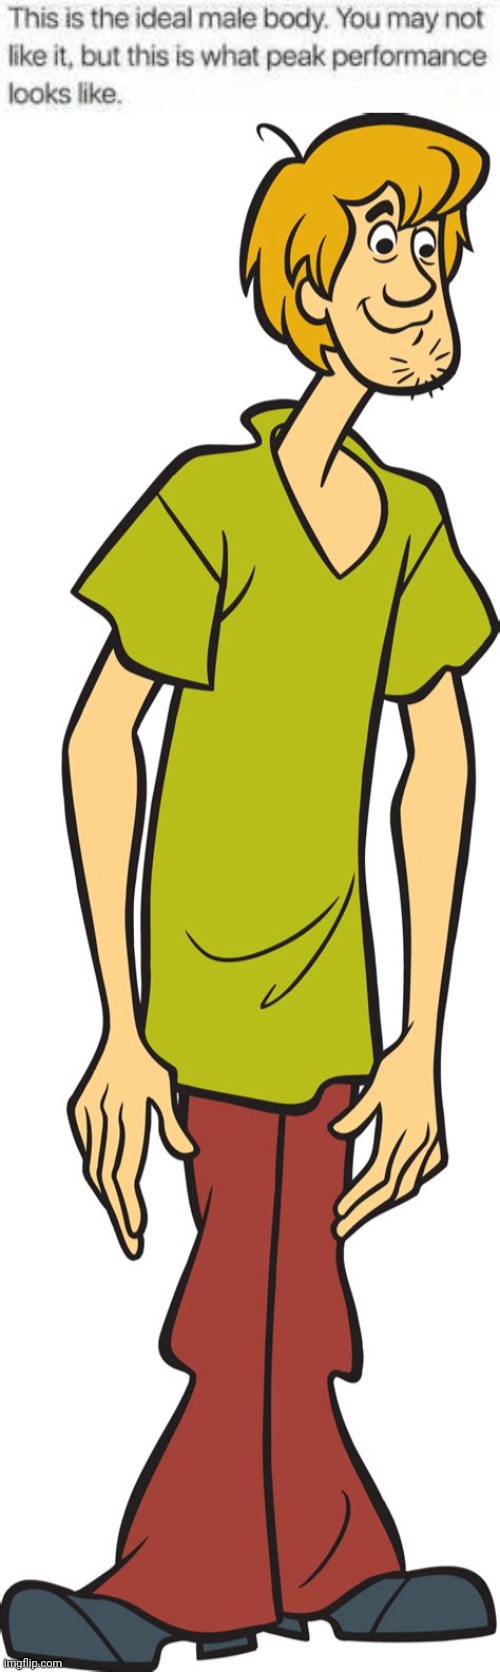 Shaggy, the ideal male body | image tagged in shaggy,shaggy meme,scooby doo,scooby doo shaggy,cartoons,comics/cartoons | made w/ Imgflip meme maker